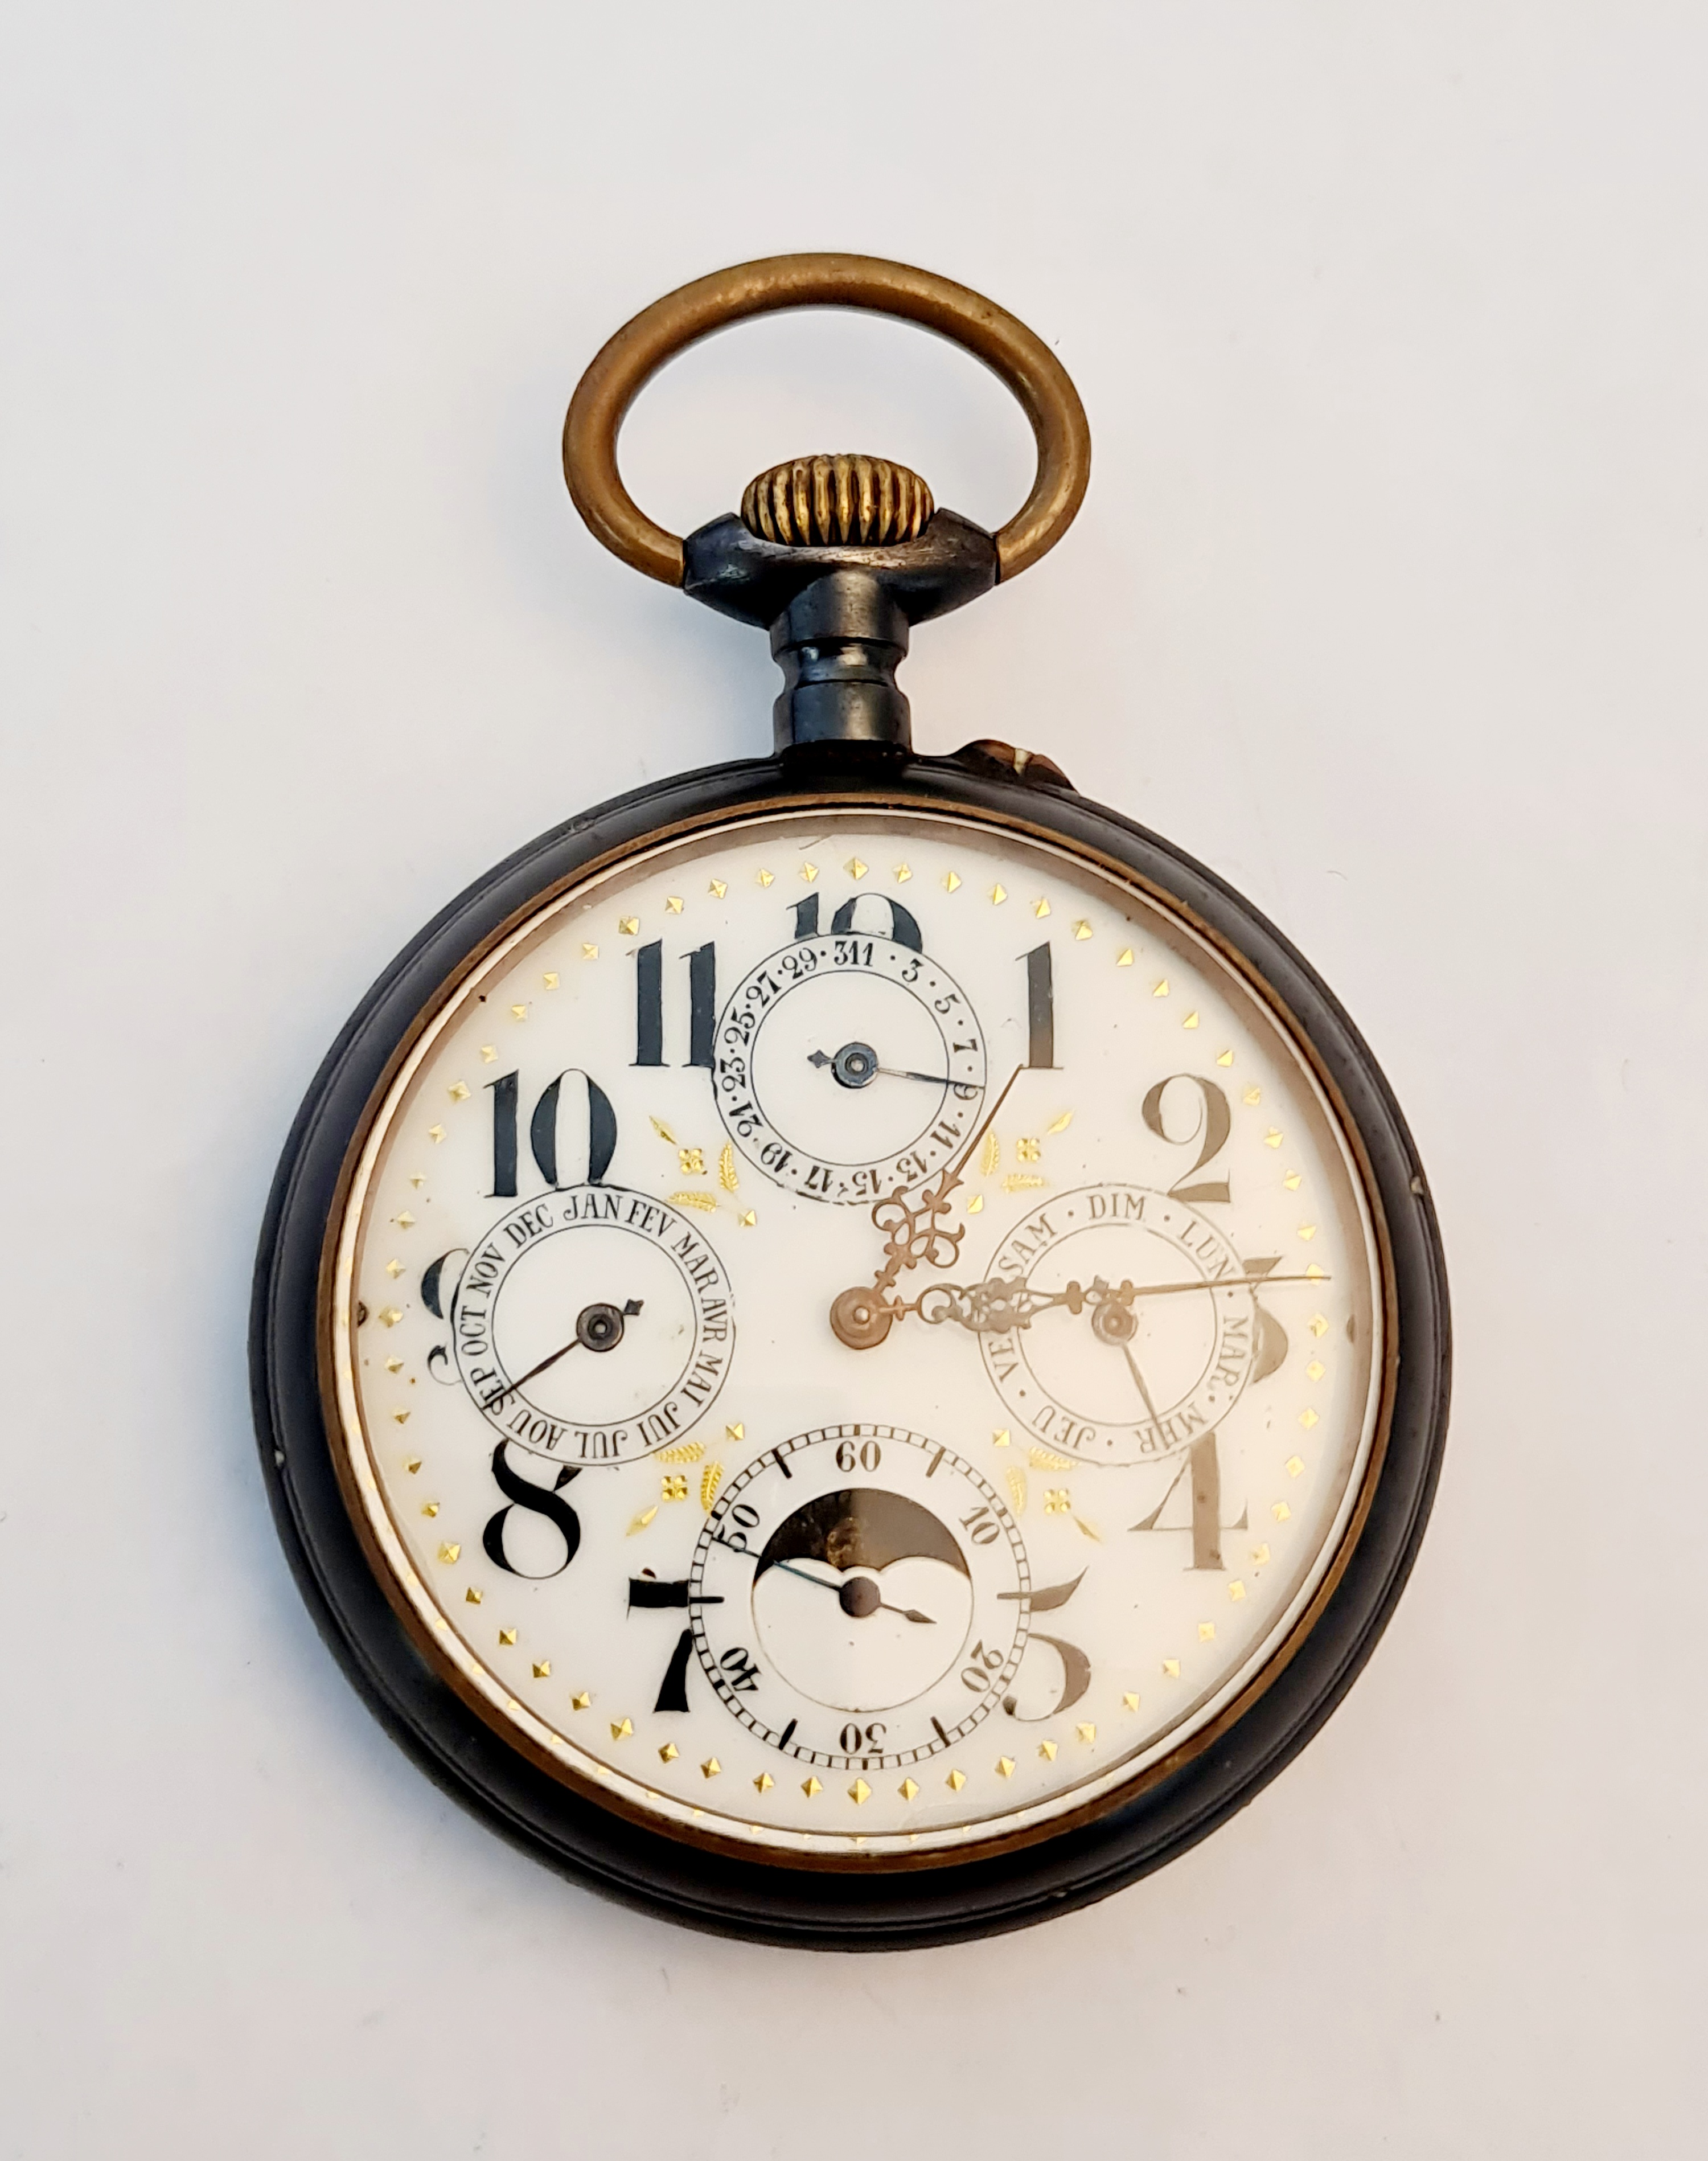 A French base metal goliath pocket watch with subsidiary dials for minutes, day, date, and month